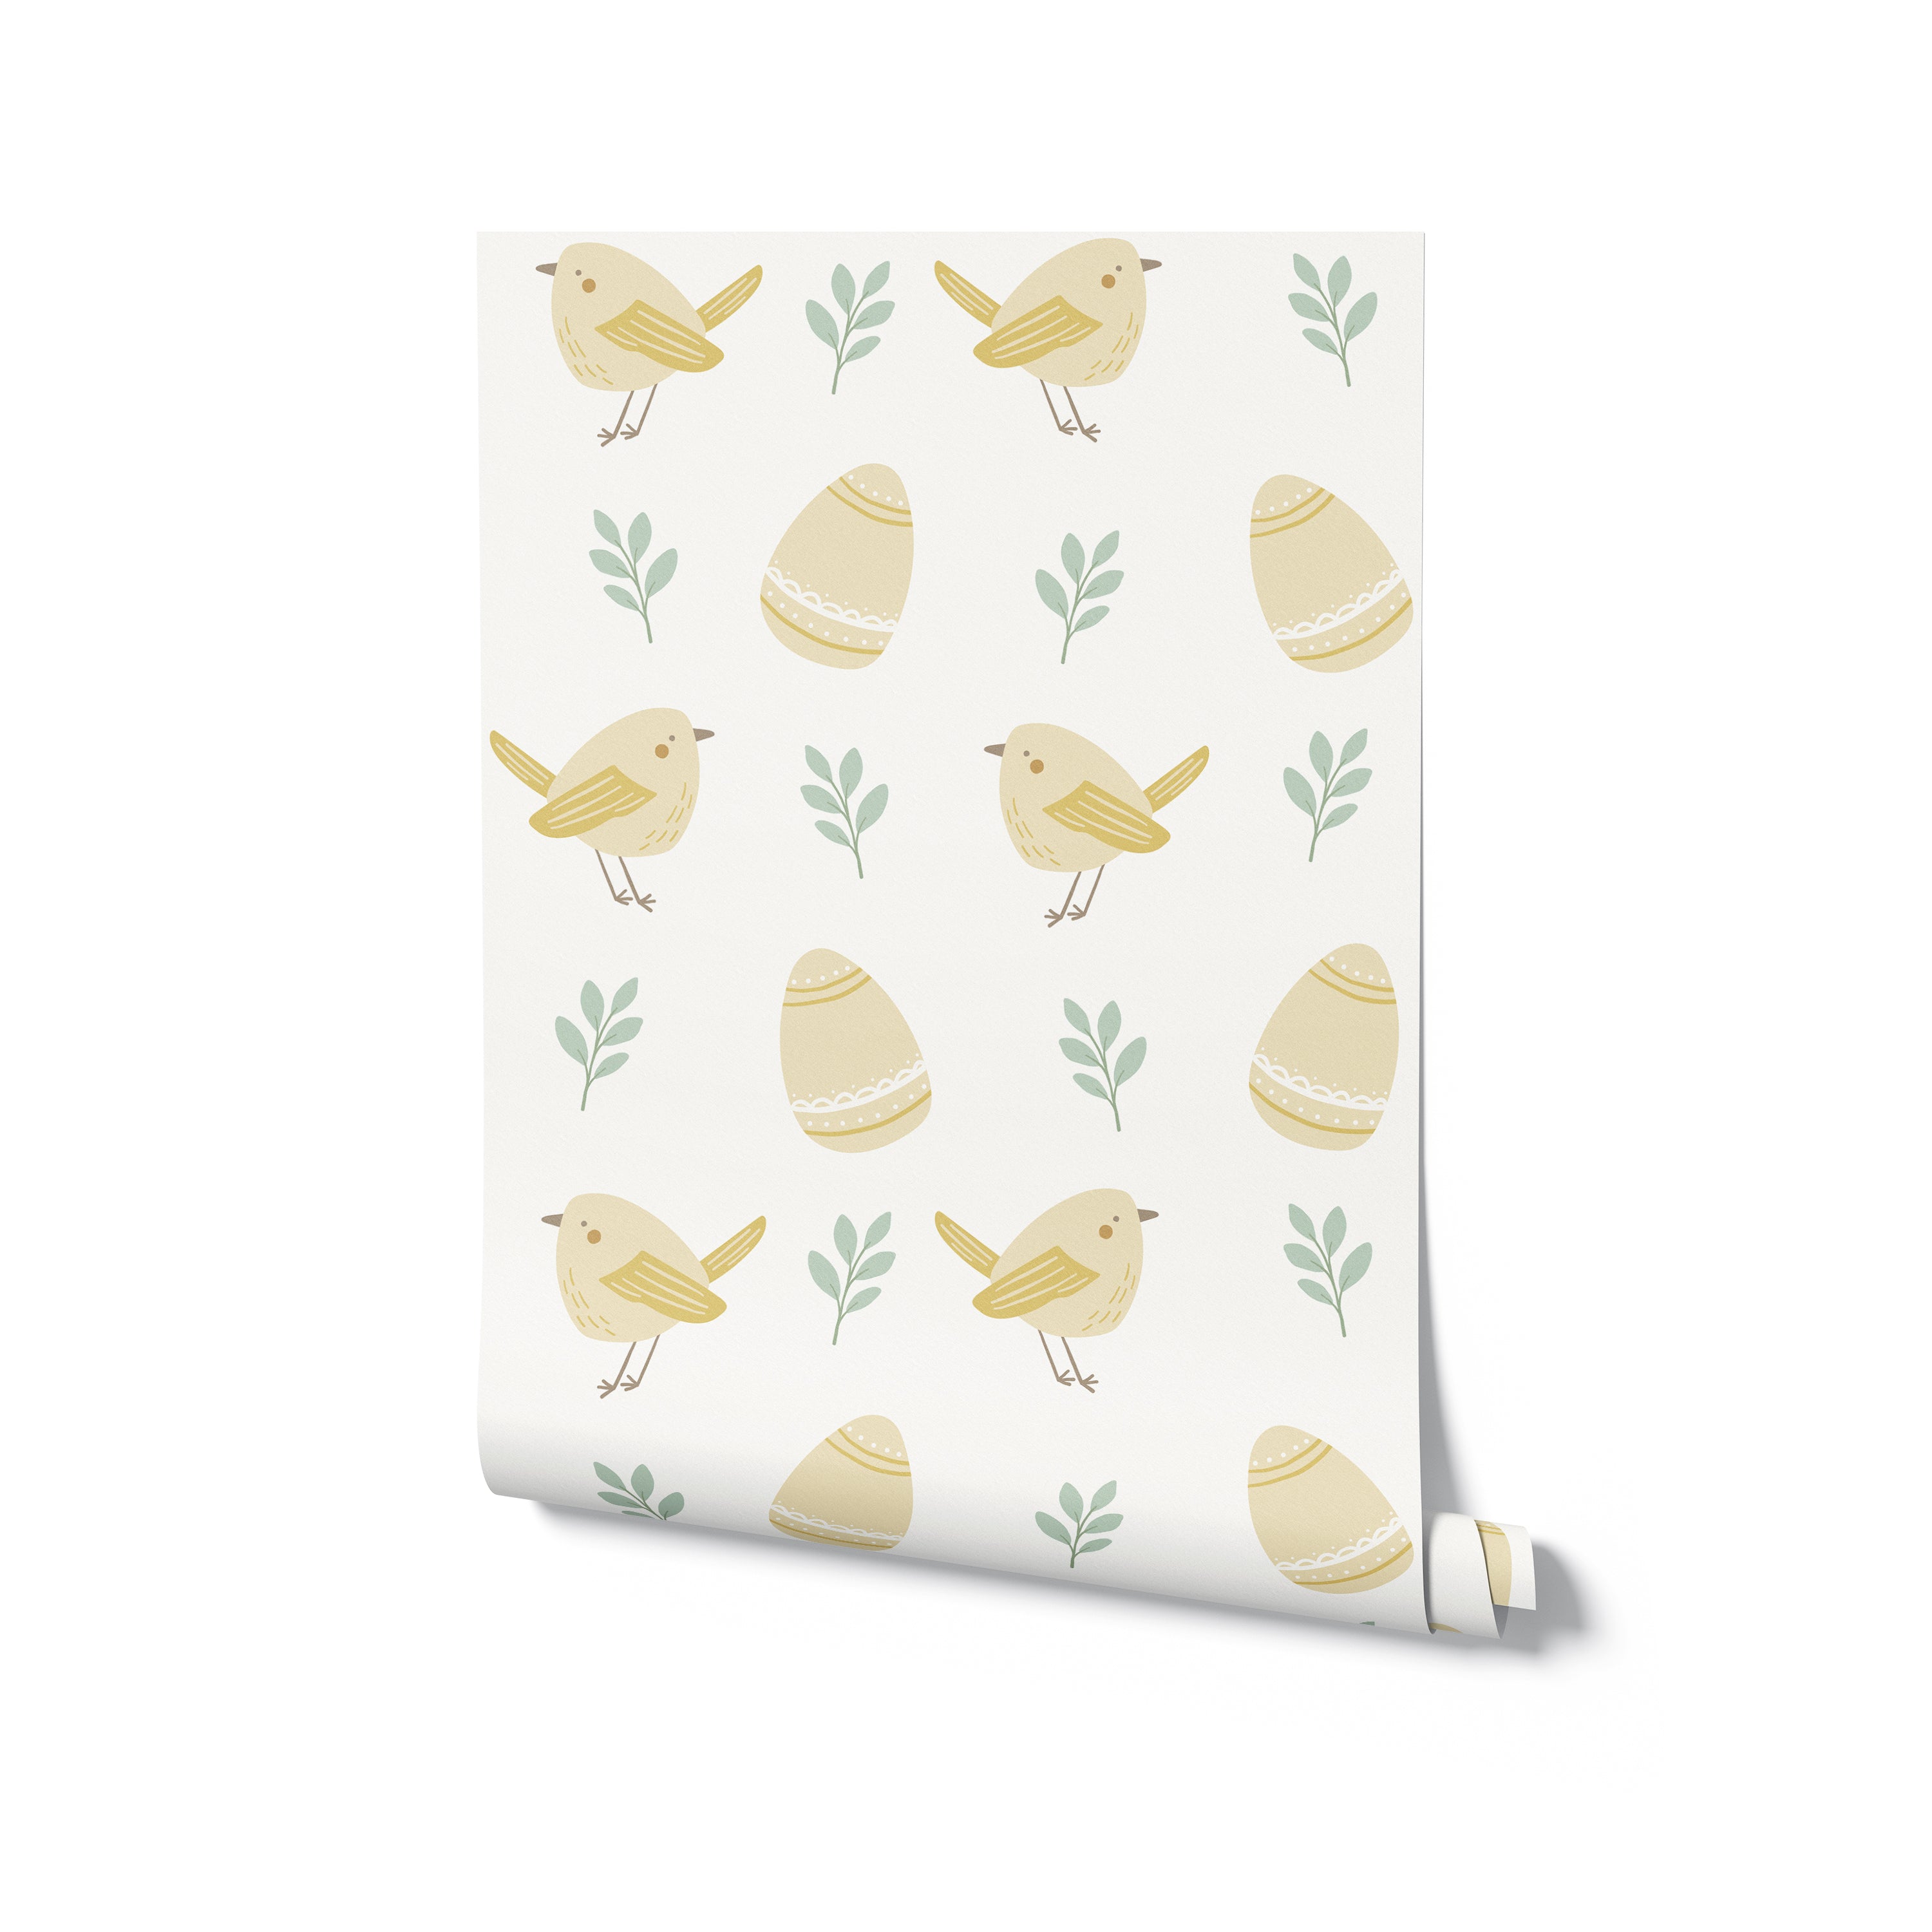 Rolled-up 'Nursery Baby Chick Wallpaper' showcasing a repeating design of yellow chicks, Easter eggs, and small green plants on a white background